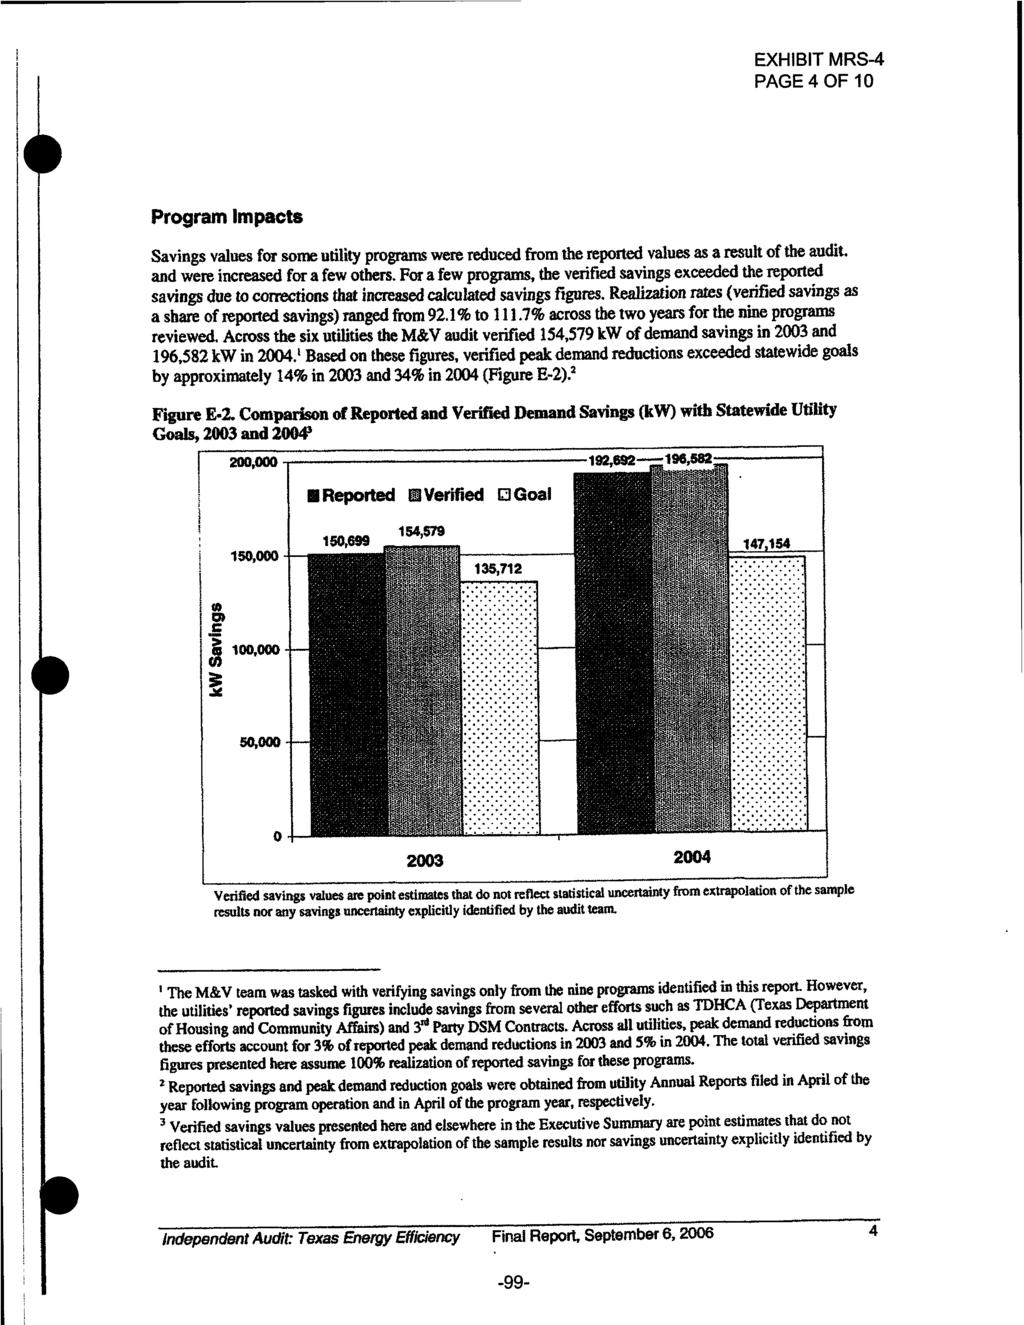 EXHIBIT MRS-4 PAGE 4 OF 10 Program Impacts Savings values for some utility program were reduced from the reported values as a result of the audit. and were increased for a few others.